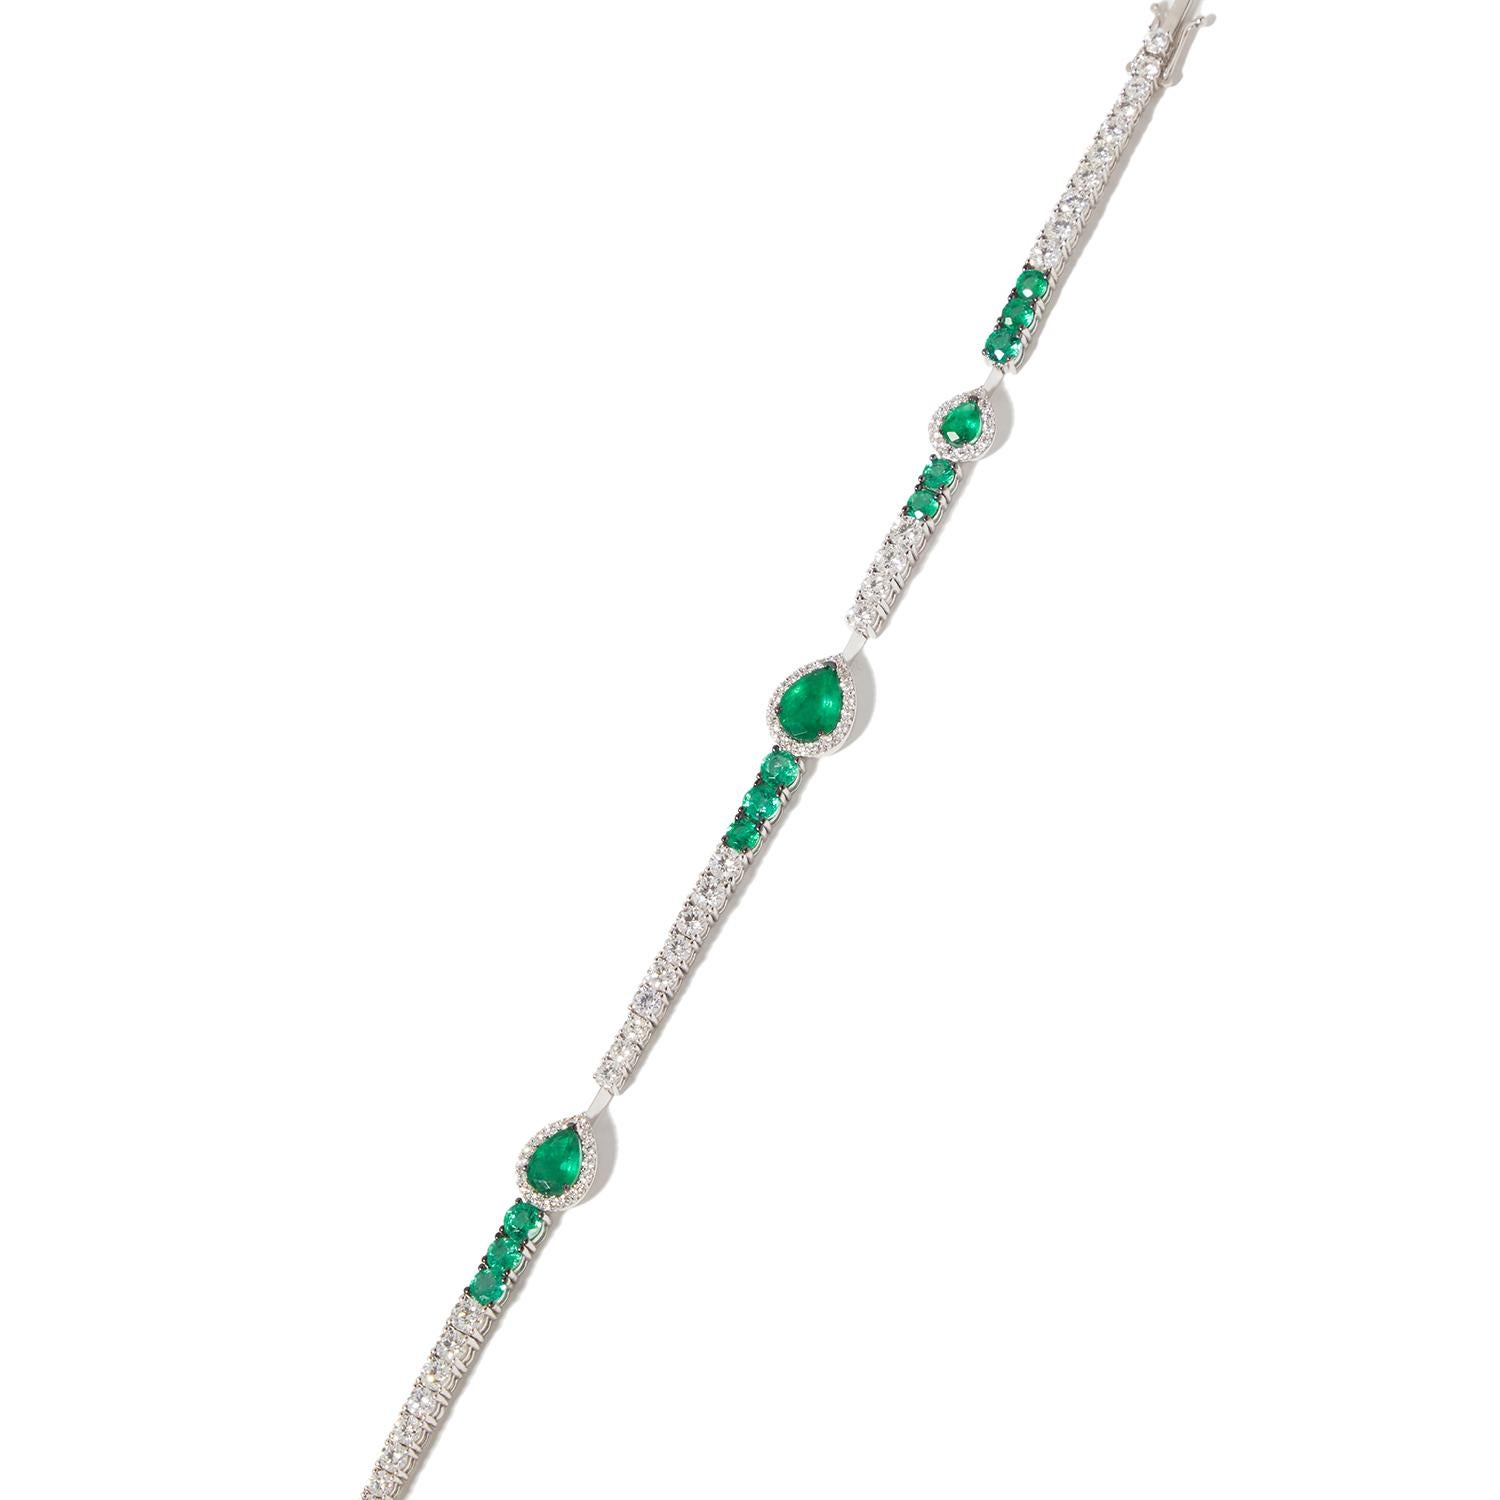 18 Karat white gold bracelet with 3.60ct emeralds and 3.35cts of diamonds.

At Bonebakker we love colour. Recently we found 3 pear shaped emeralds and designed a bracelet that makes this unique gemstone display its full beauty. A connecting bar of